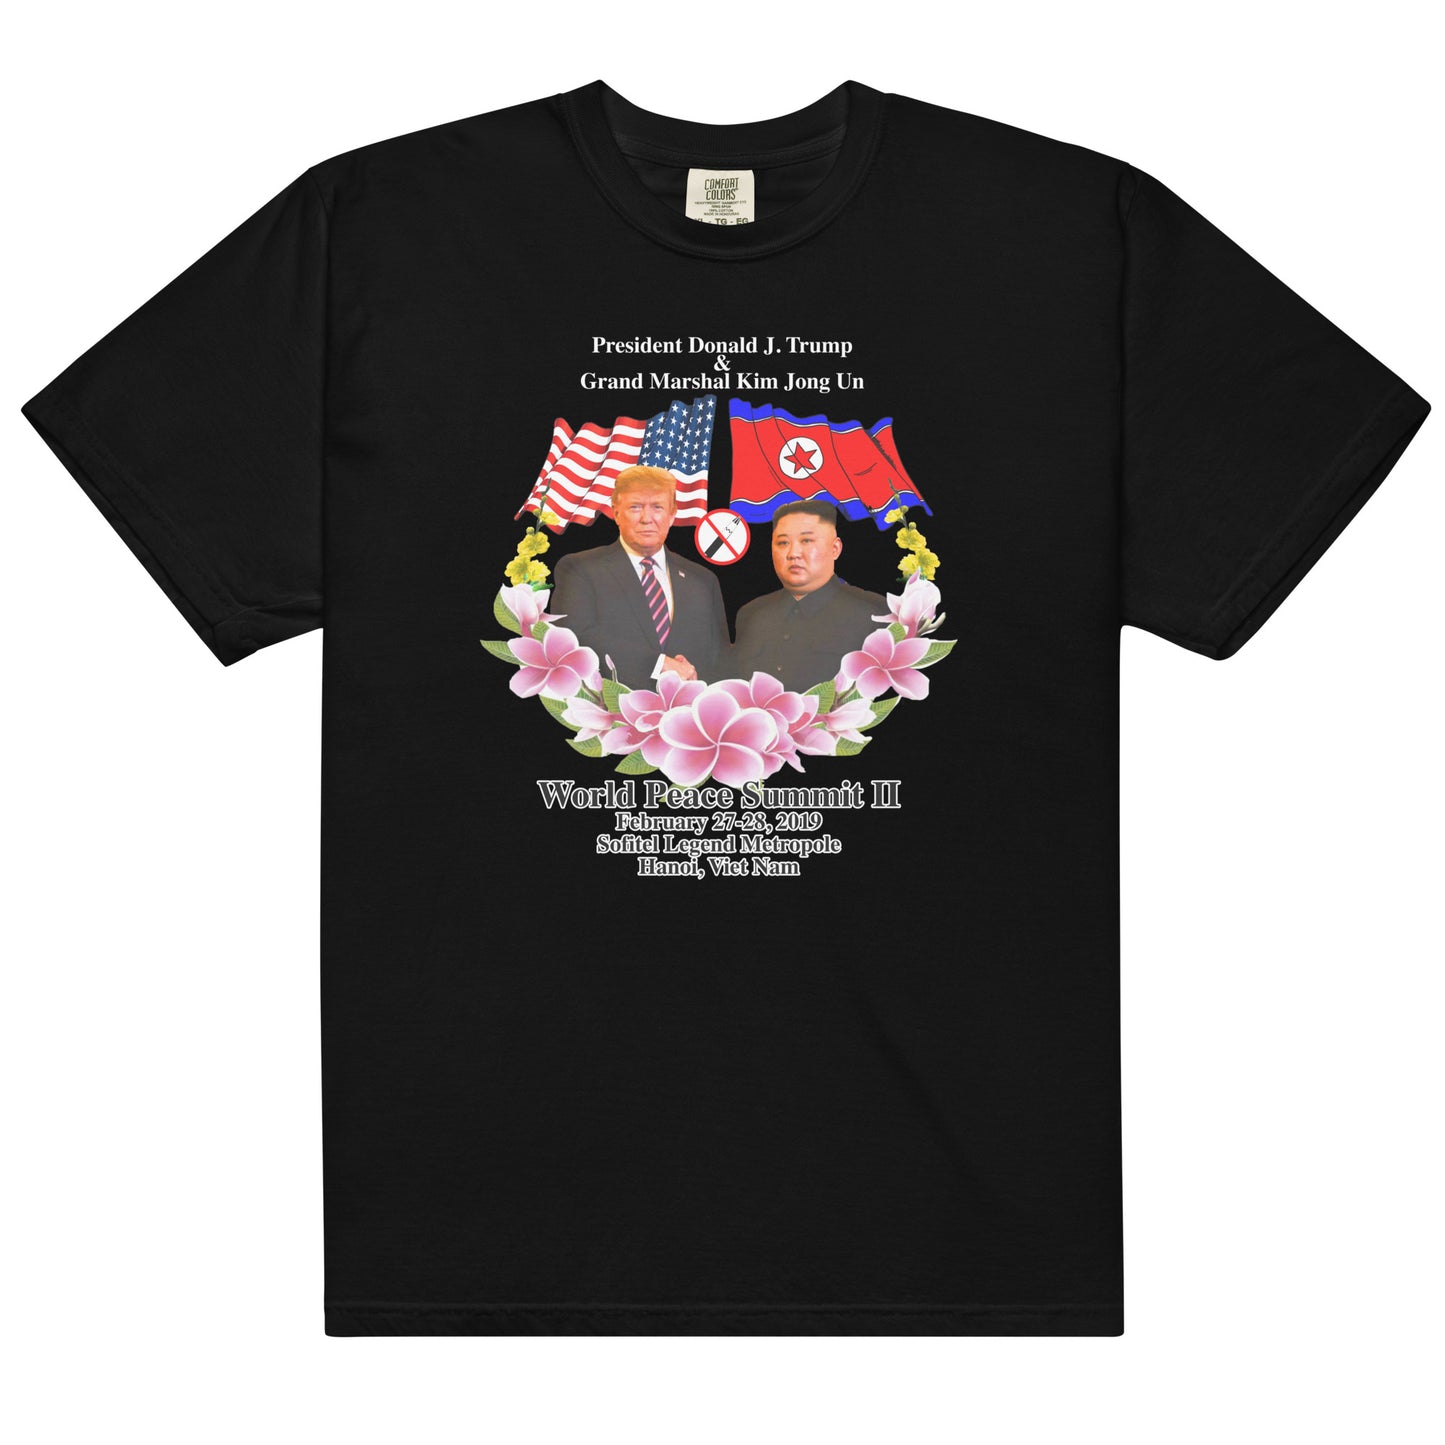 Peace and Friendship Shirt.